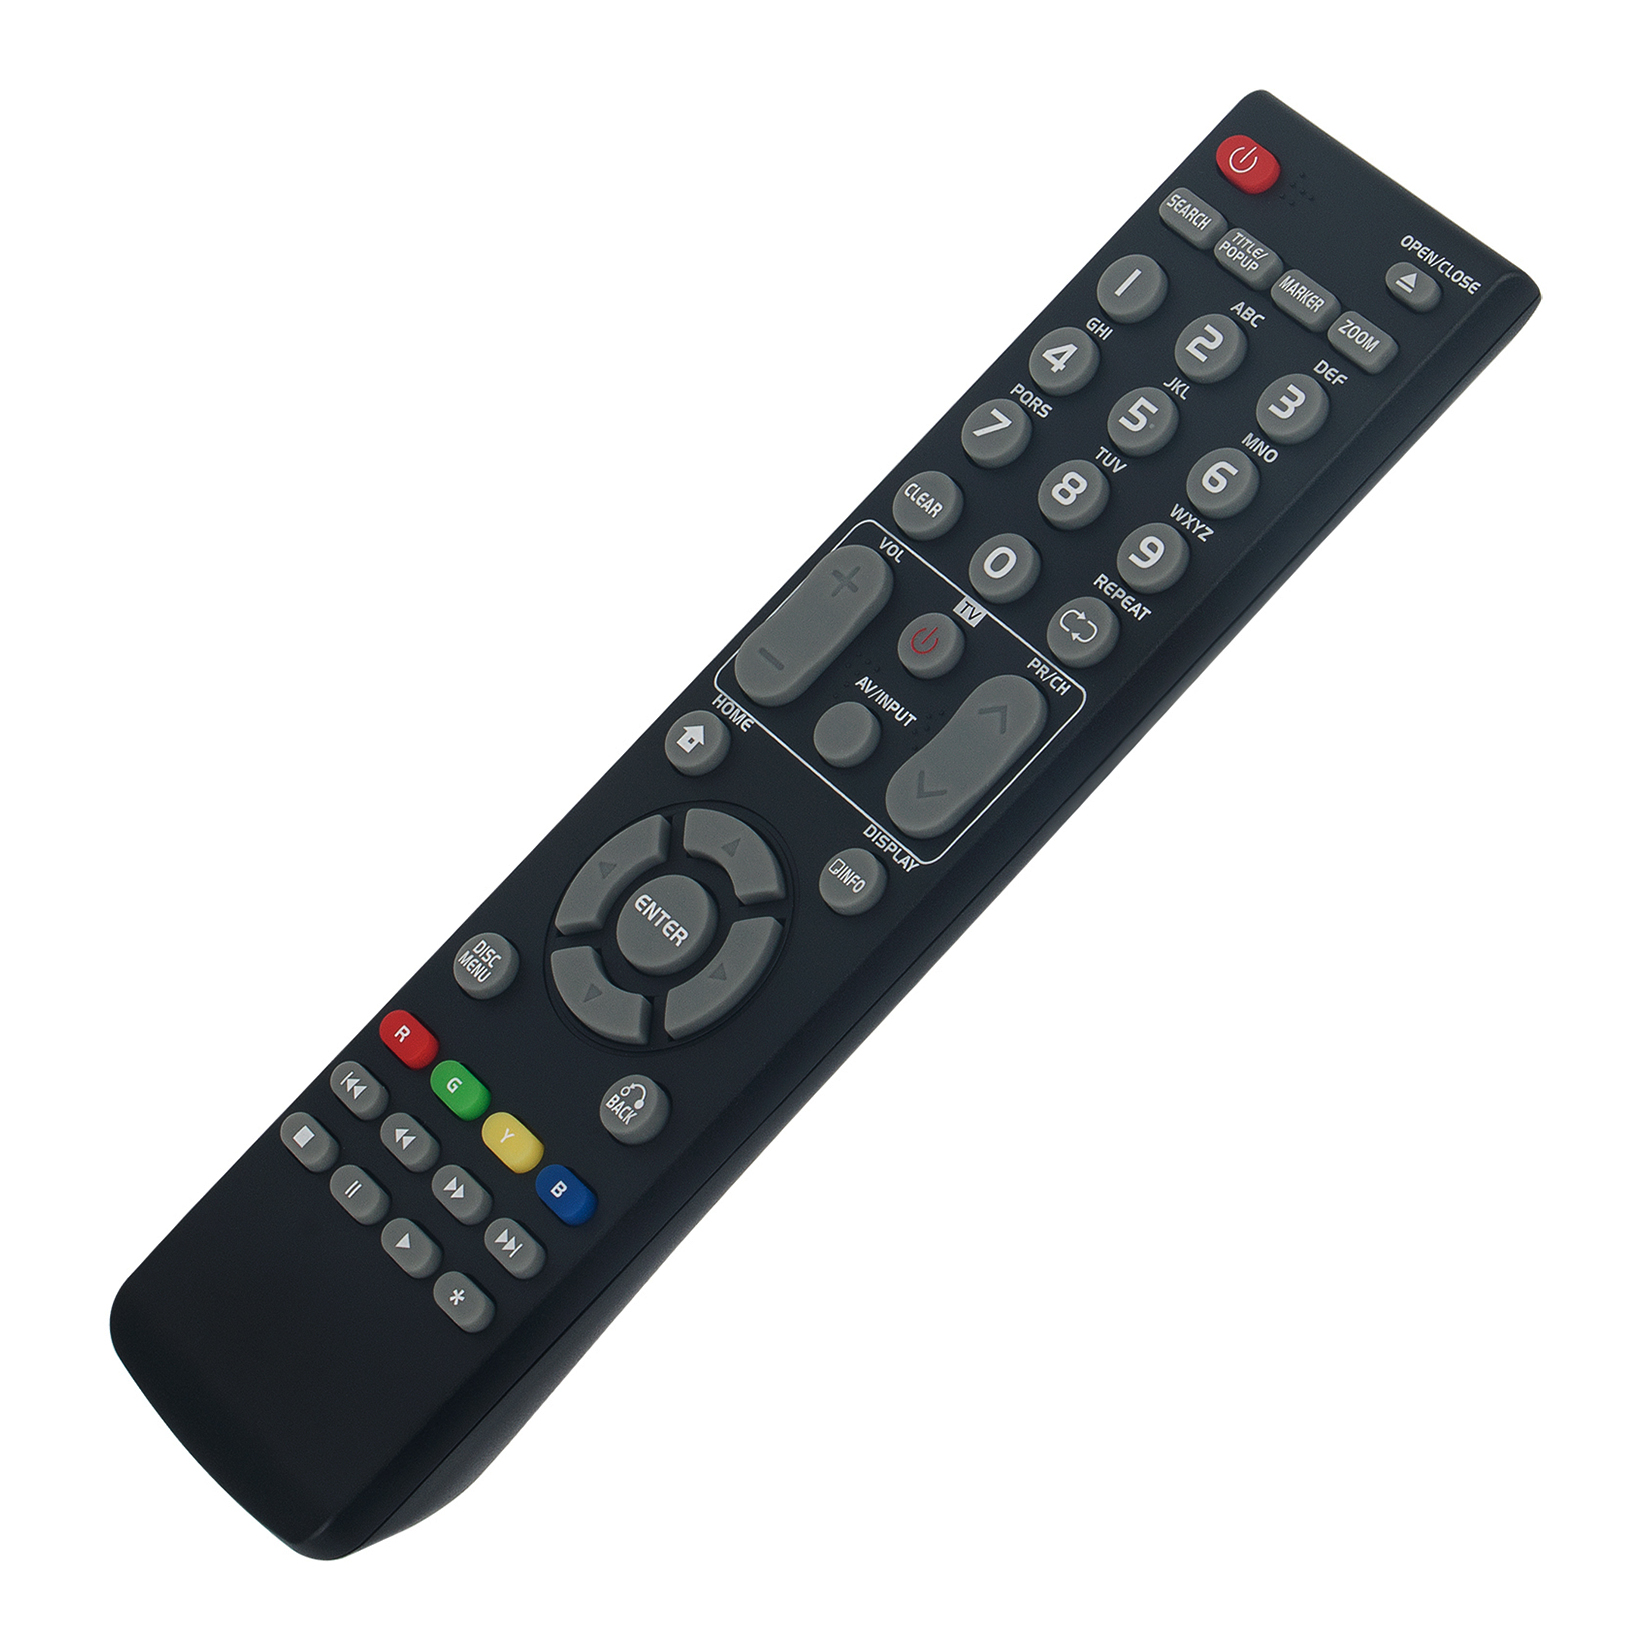 New AKB73375501 Replaced Remote Control Sub AKB73295901 Fit for LG Blu-ray Player BD660N BD645 BP650 BD650 BD650K BD660 BD660K - image 3 of 5